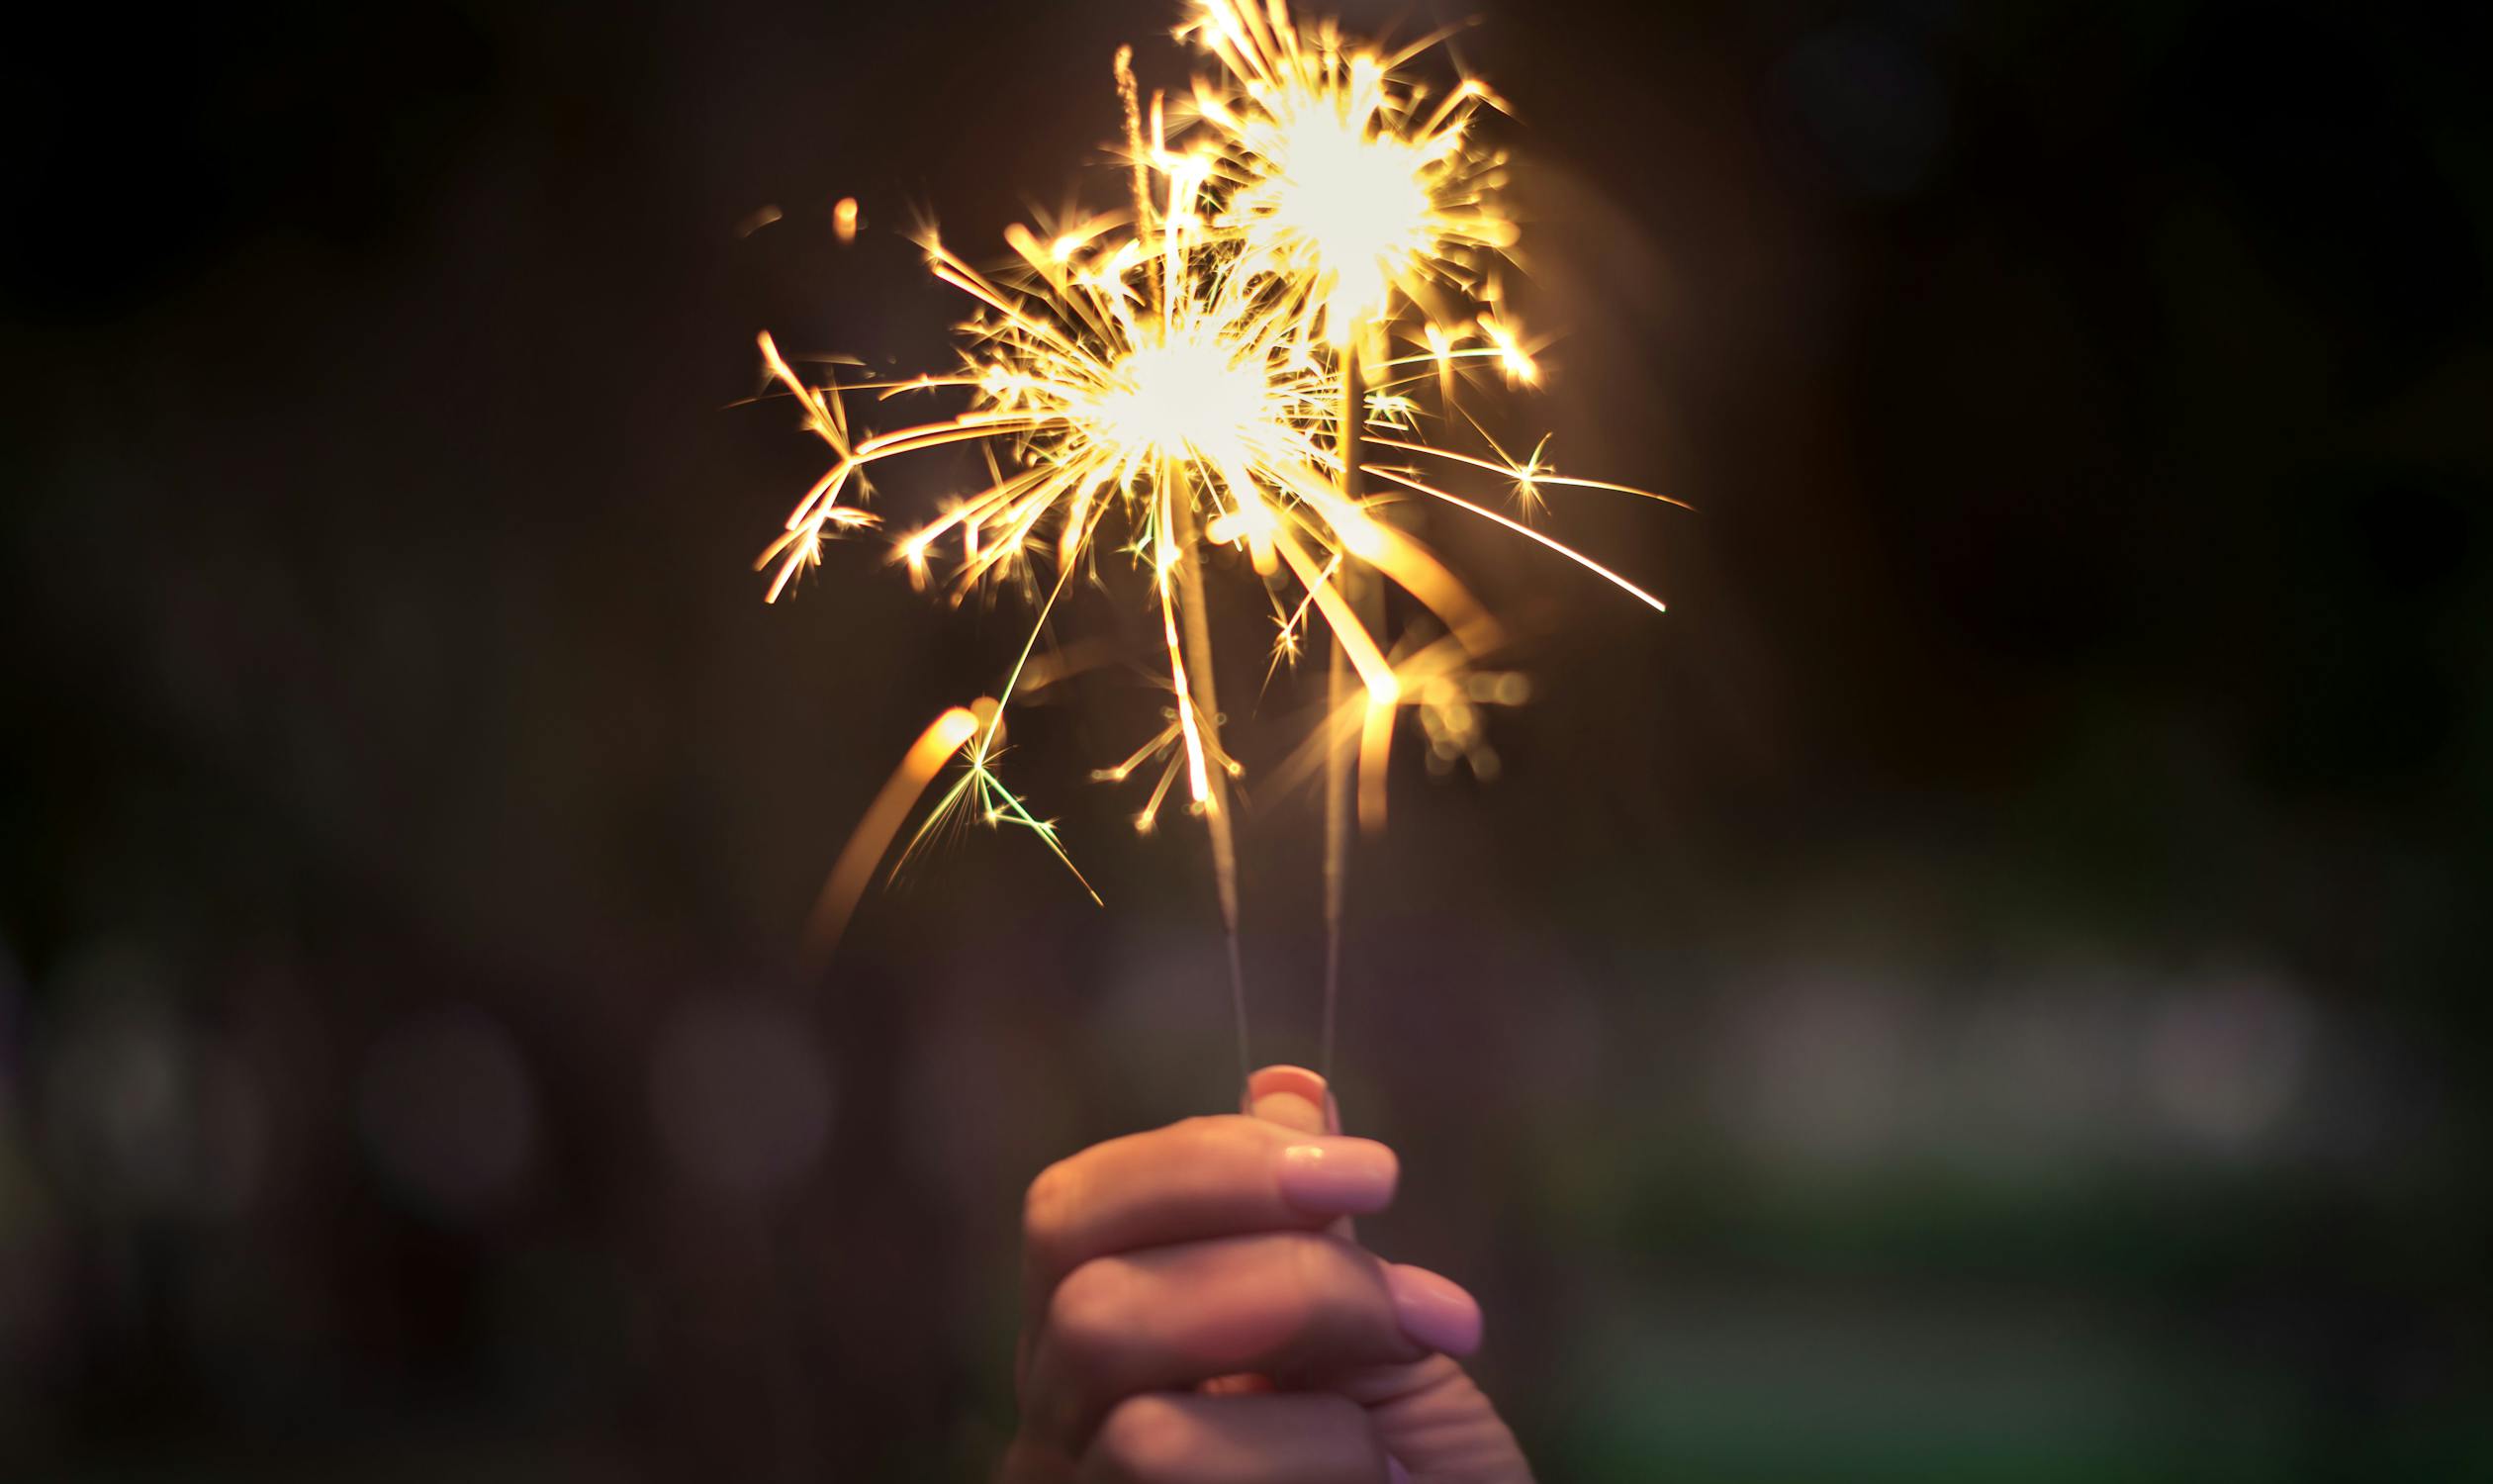 Sparkles Photo by Tairon Fernandez from Pexels: https://www.pexels.com/photo/person-holding-lighted-sparkler-450301/